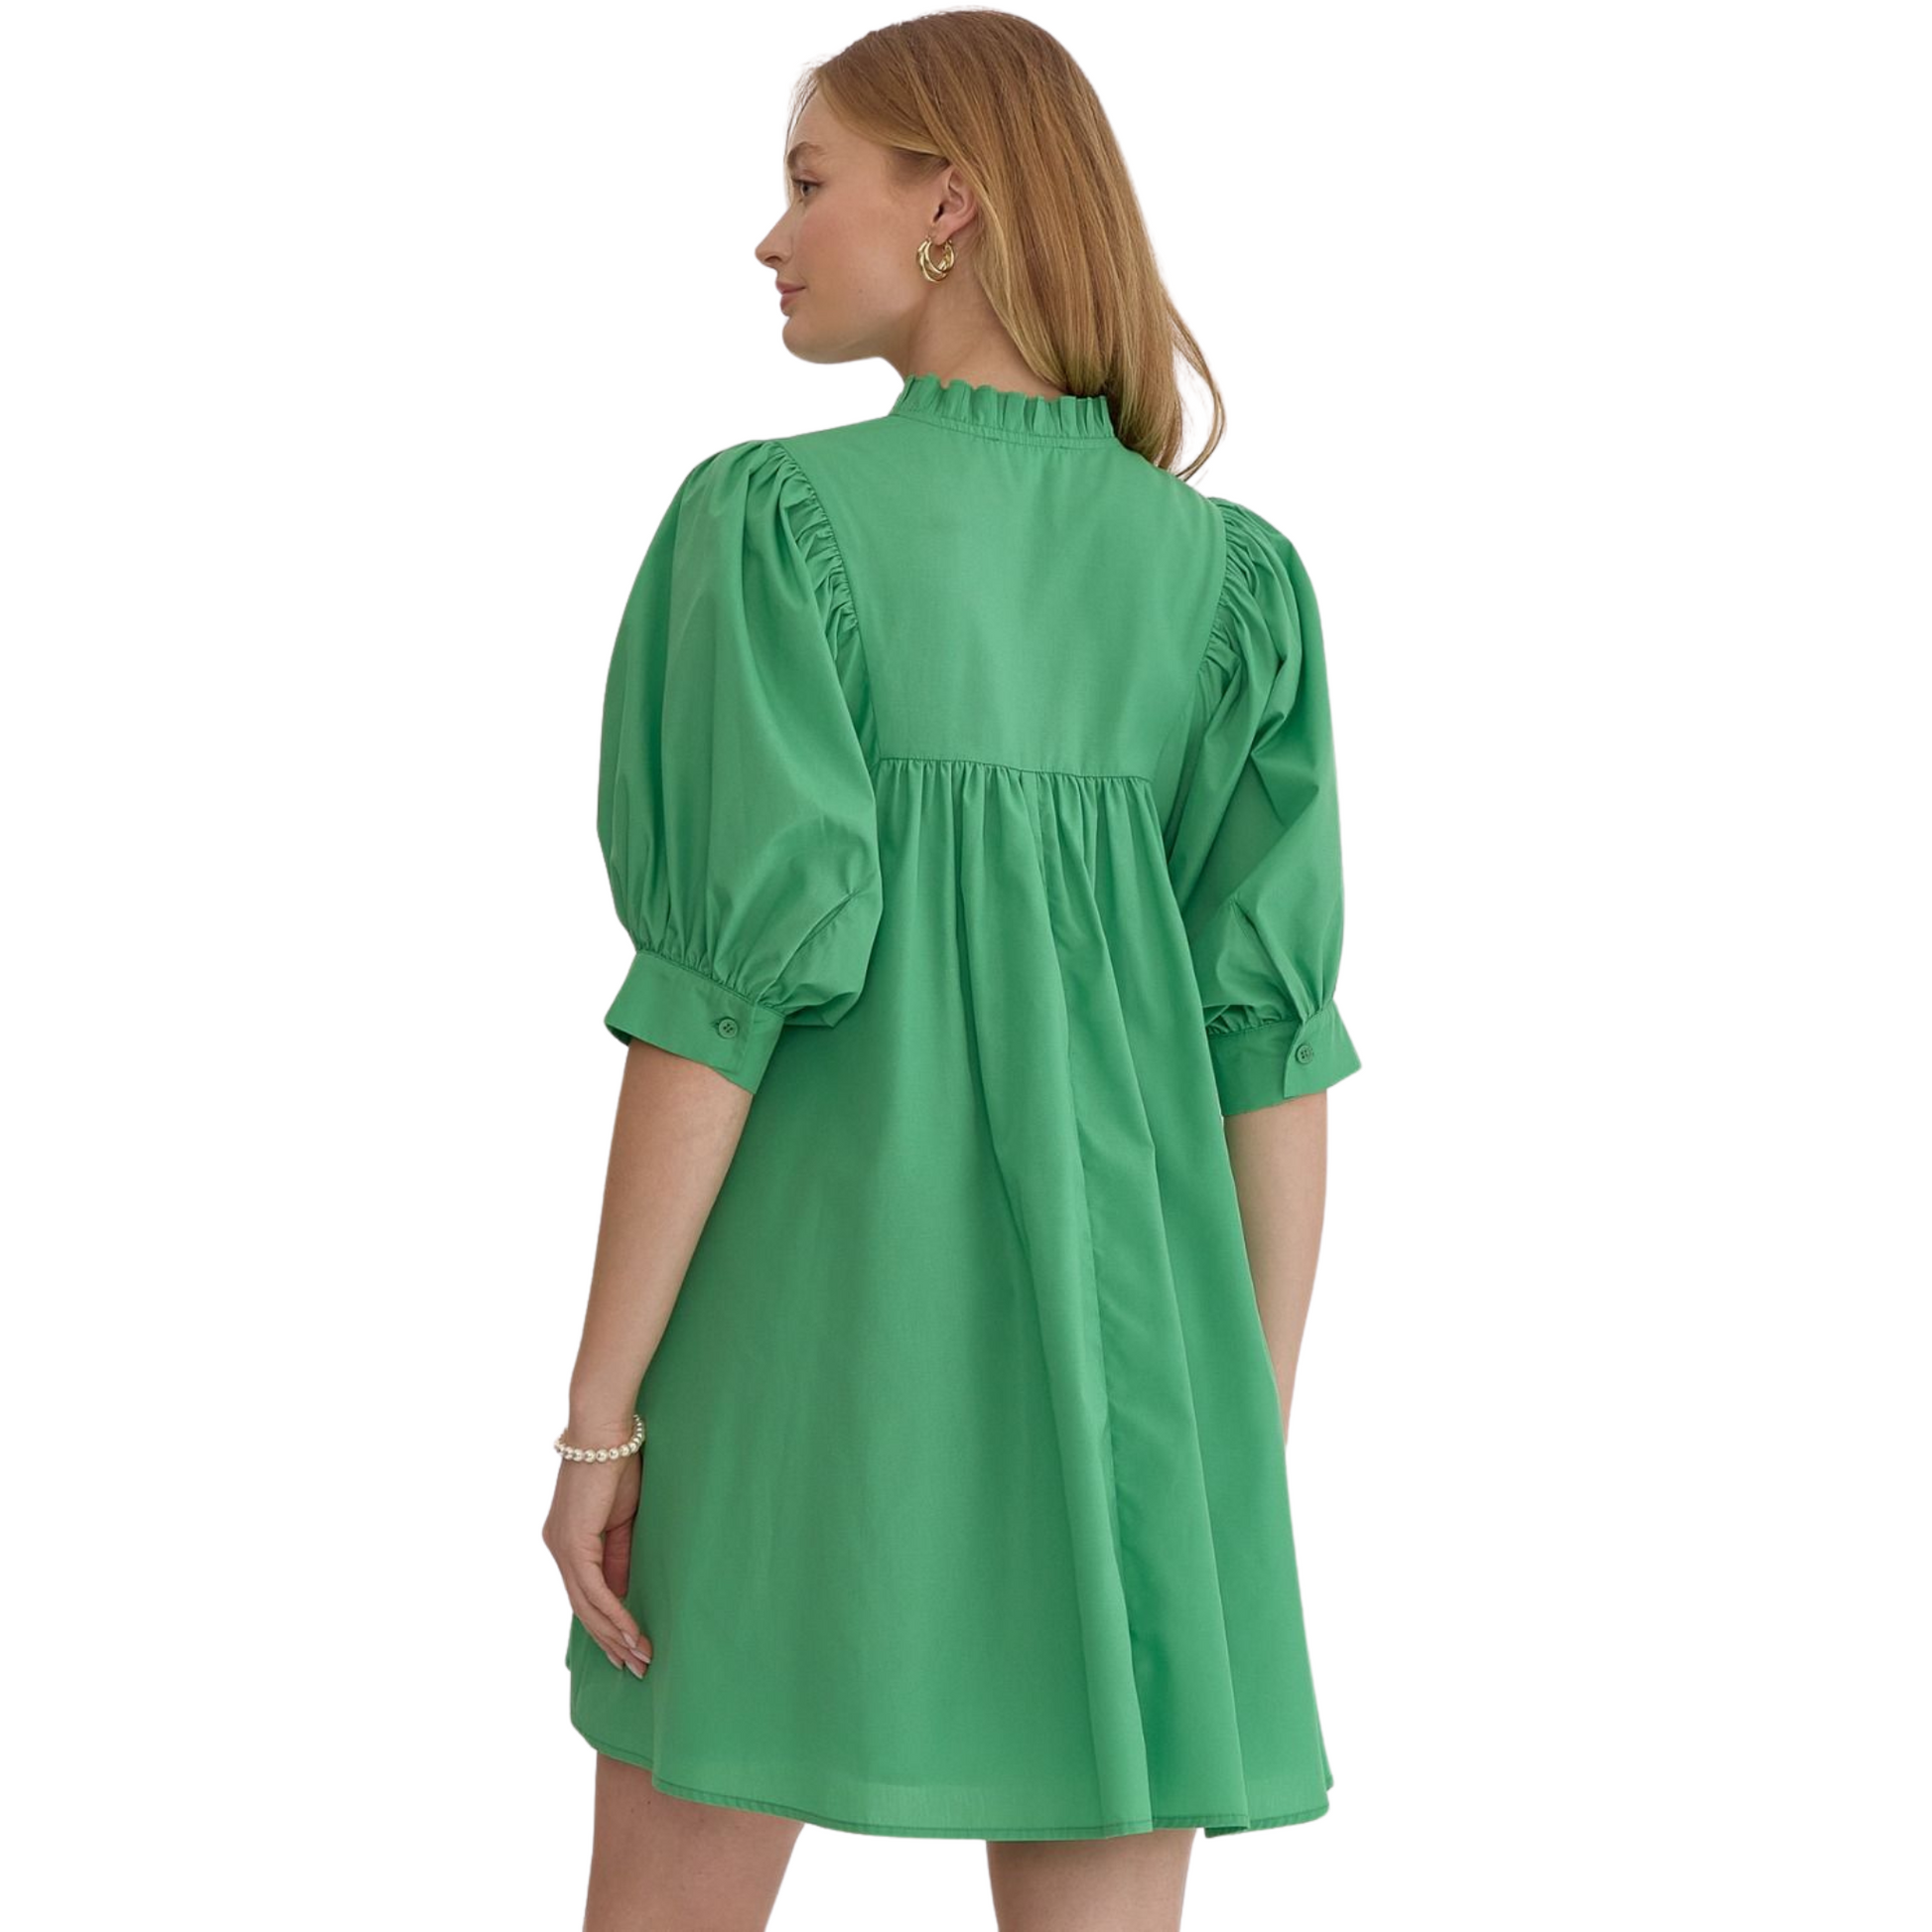 Expertly crafted with a solid v-neck and half sleeves, this mini dress exudes effortless elegance. The button closure at the cuff and pockets at the sides add functionality to the stylish design. Lightweight, non-sheer, and lined for comfort, this woven dress is the perfect addition to your wardrobe.